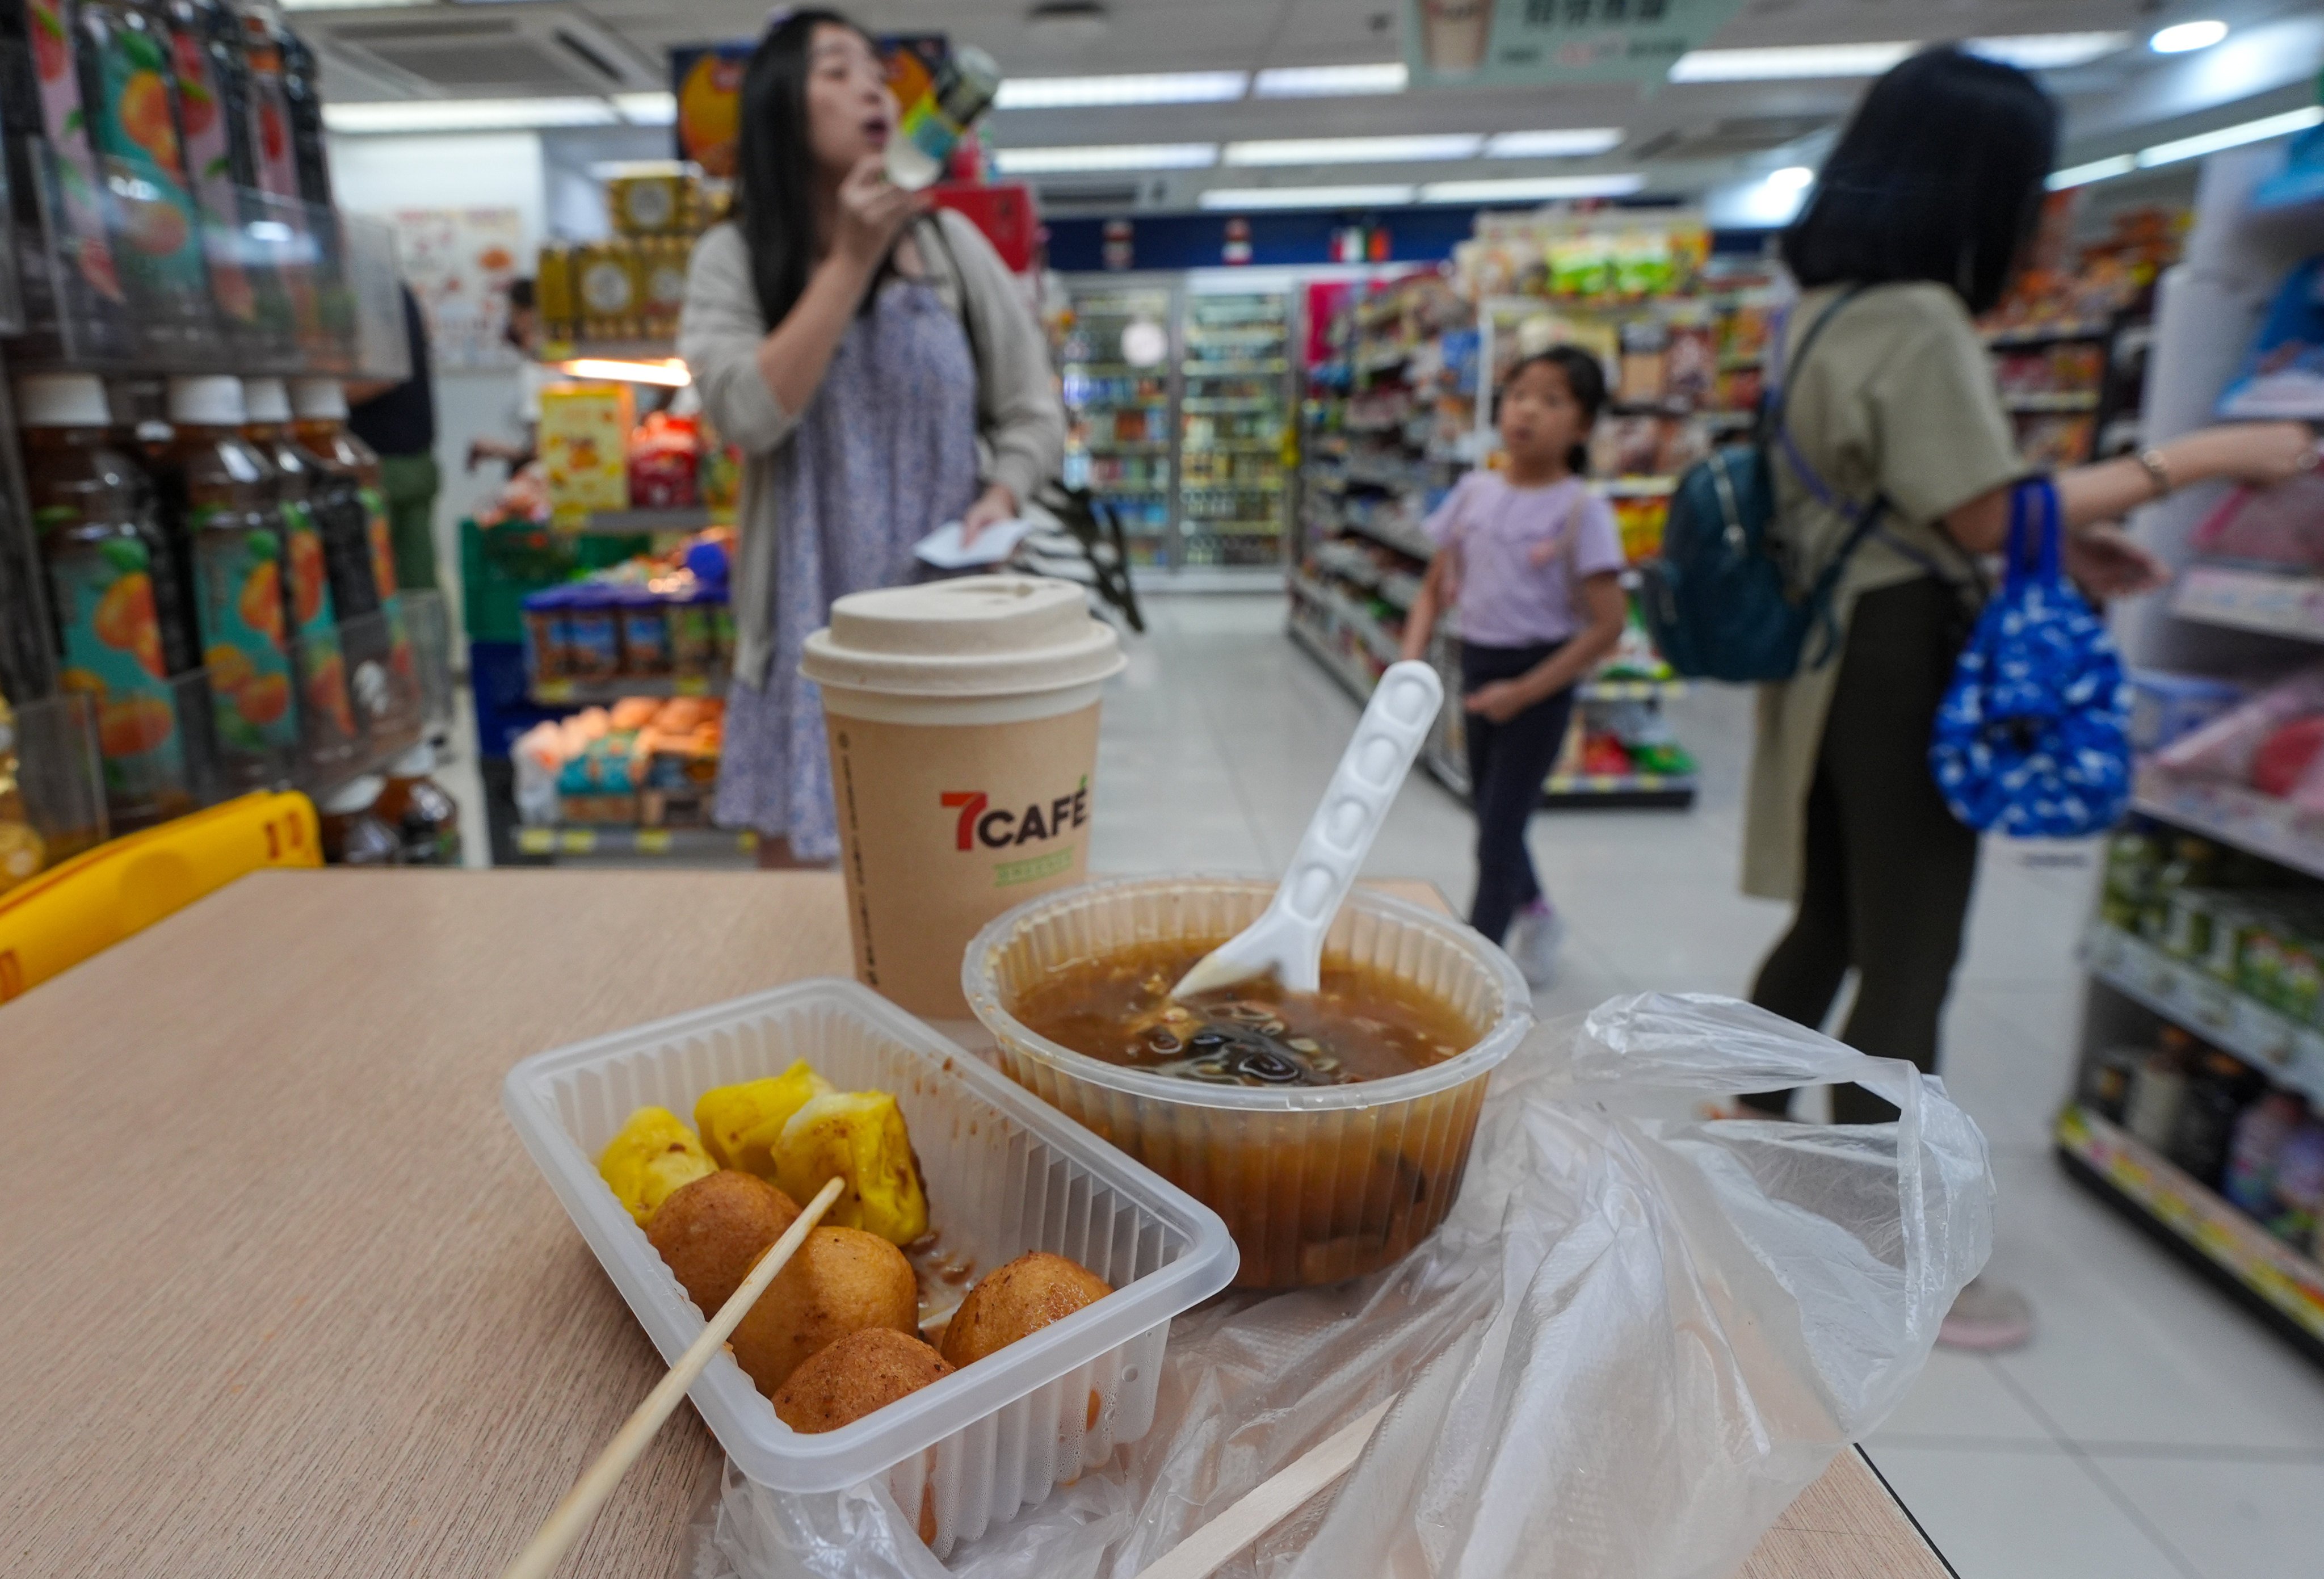 Throwaway plastic boxes are provided at 7-Eleven snack bars as confusion reigns over whether eating in stores counts as ‘dining in’. Photo: Eugene Lee